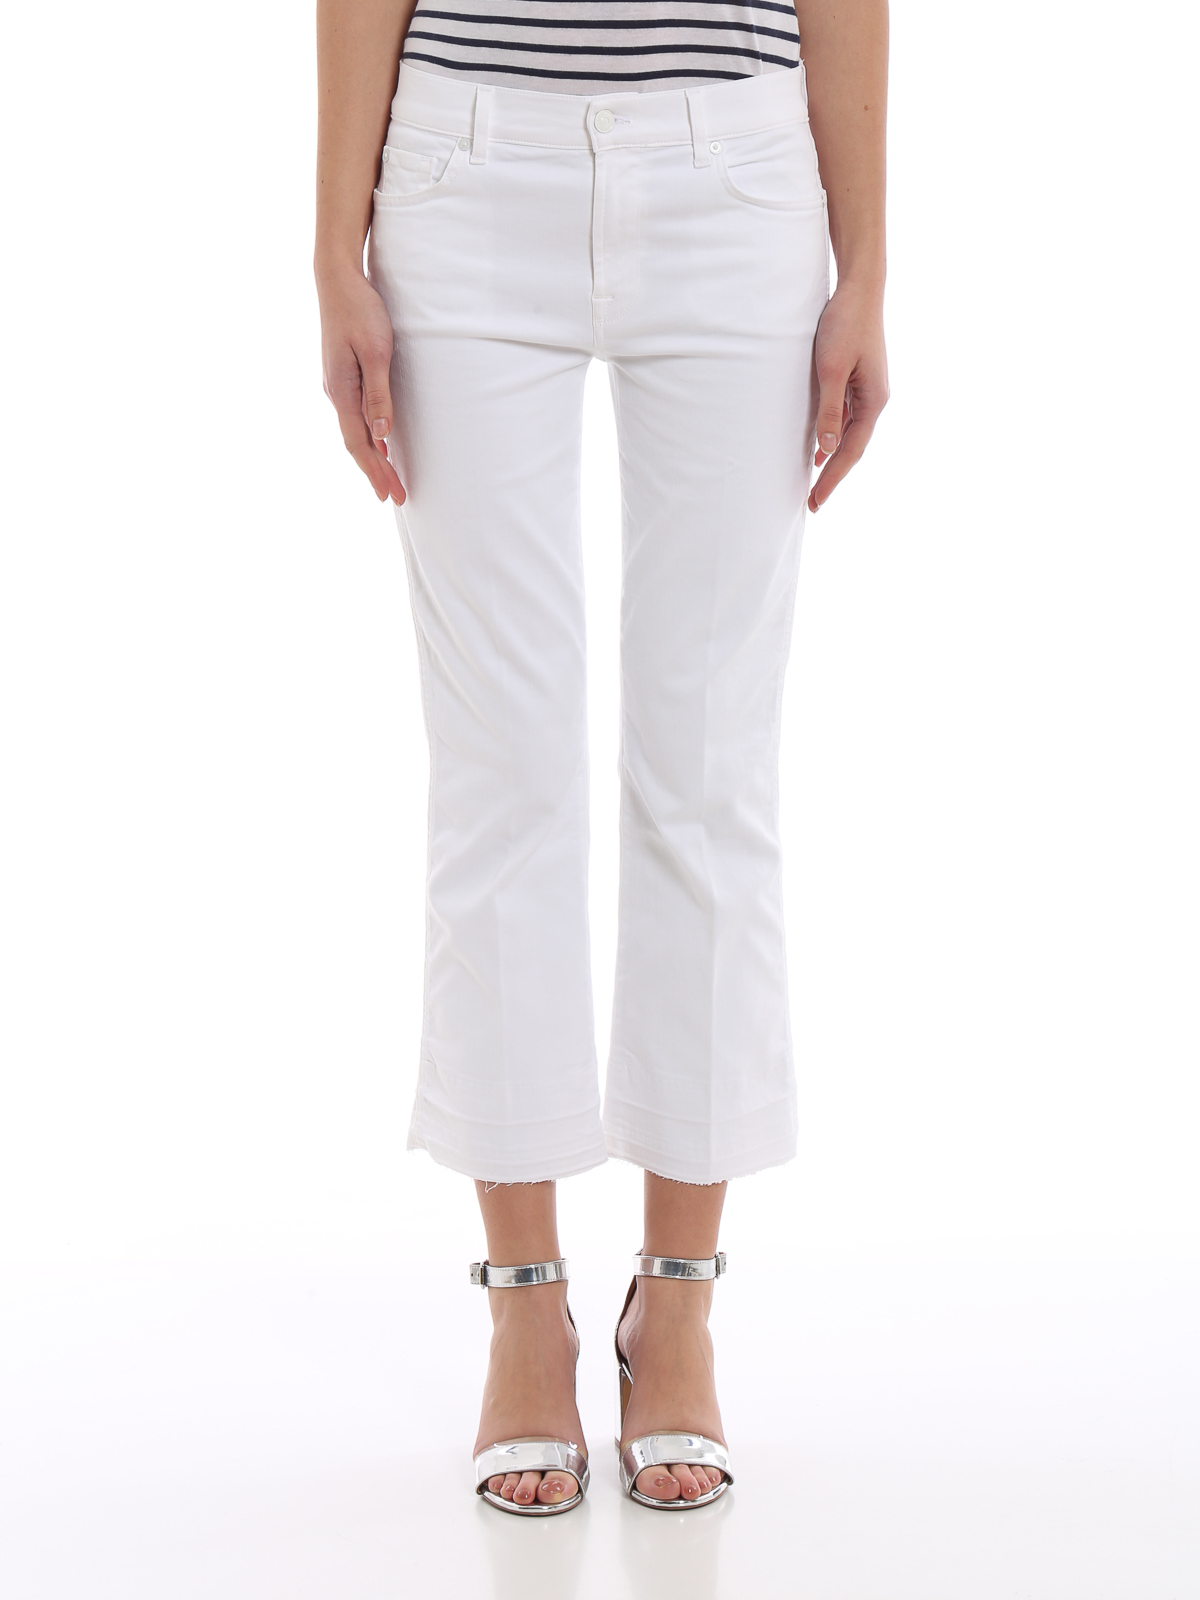 7 for all mankind white bootcut jeans